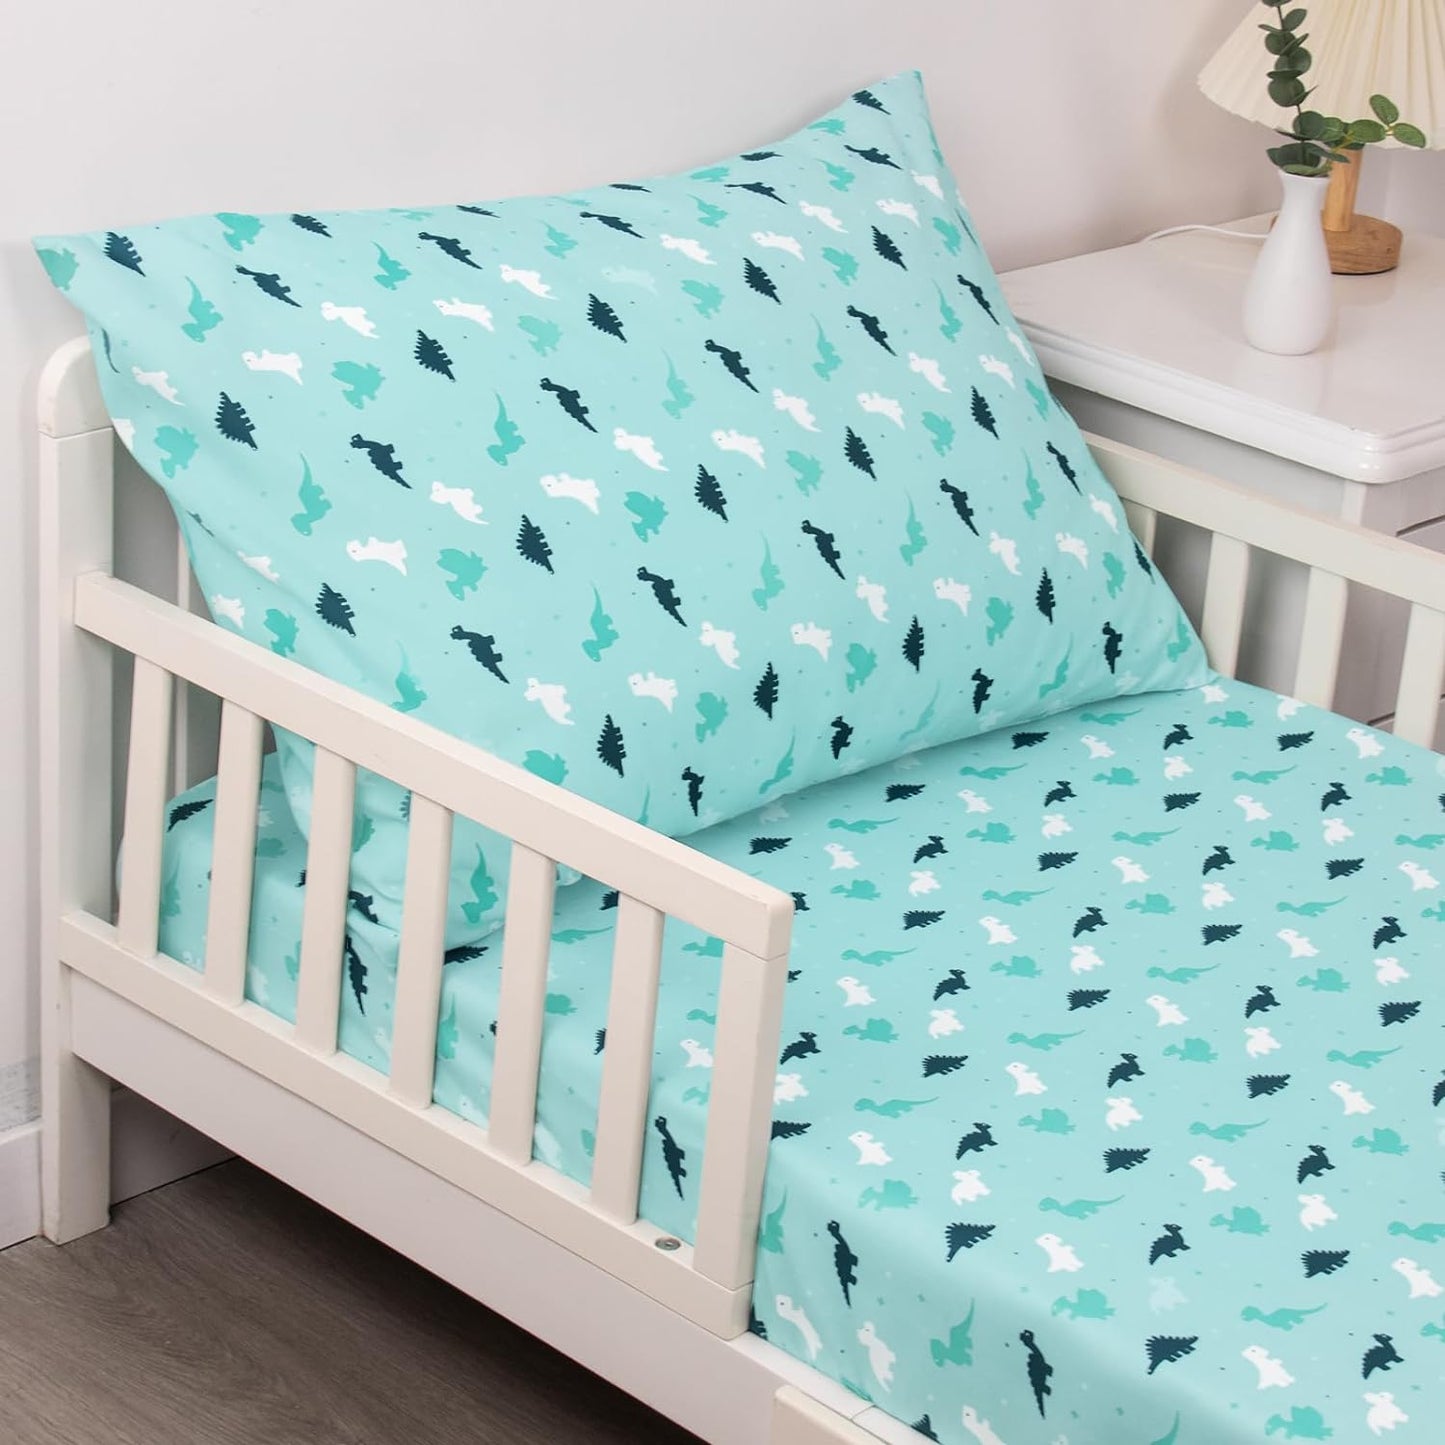 Toddler Bedding Set - 2 Pieces, Includes a Crib Fitted Sheet and Envelope Pillowcase, Soft and Breathable, Blue Dinosaur - Biloban Online Store